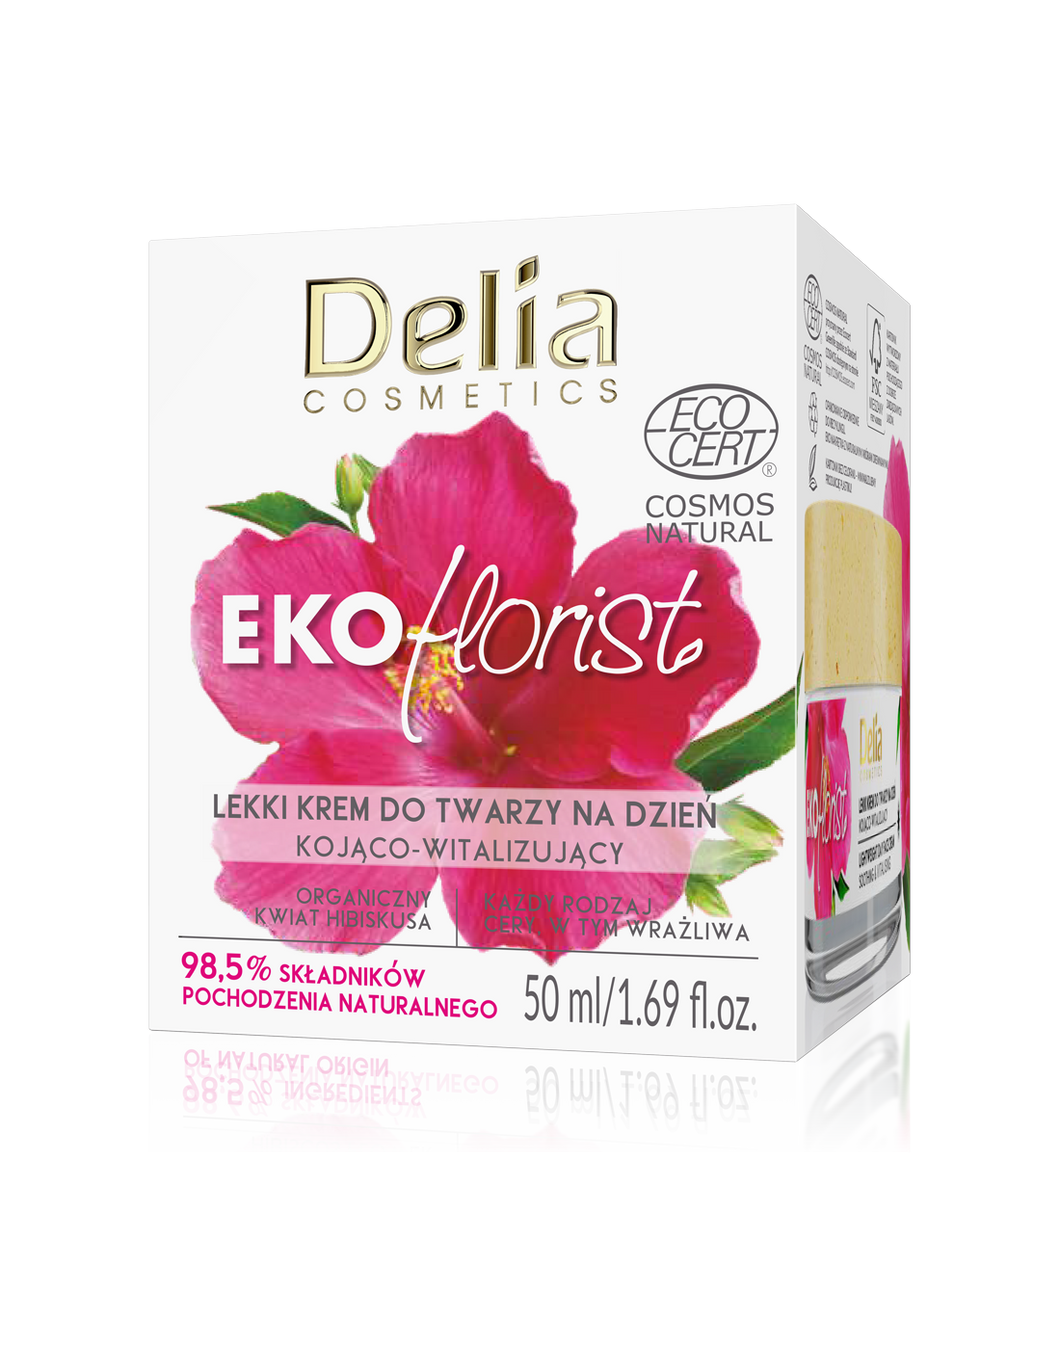 Delia - EKOflorist light day face cream, soothing and vitalizing, 50ml